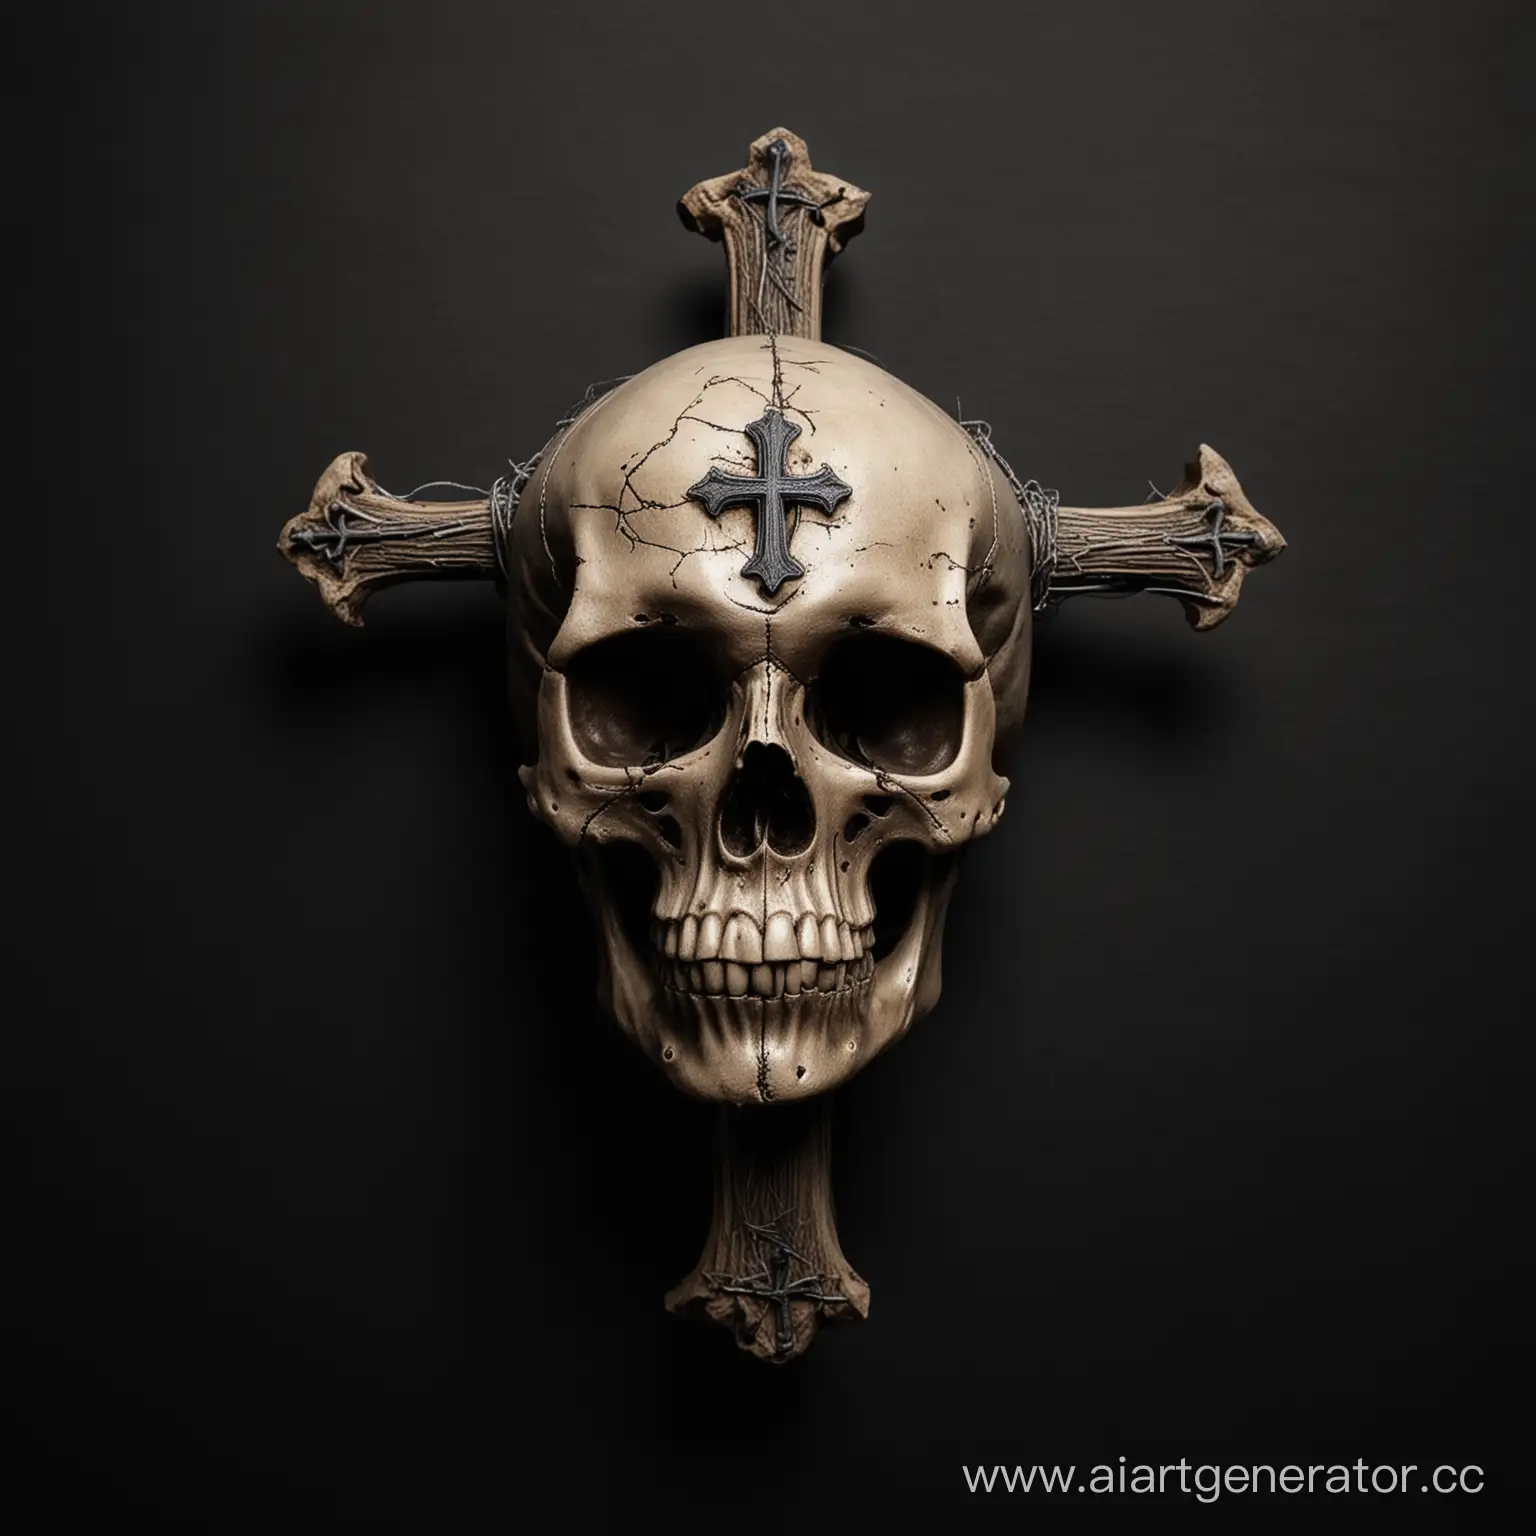 Skull-with-Cross-Eerie-Symbolism-on-Black-Background